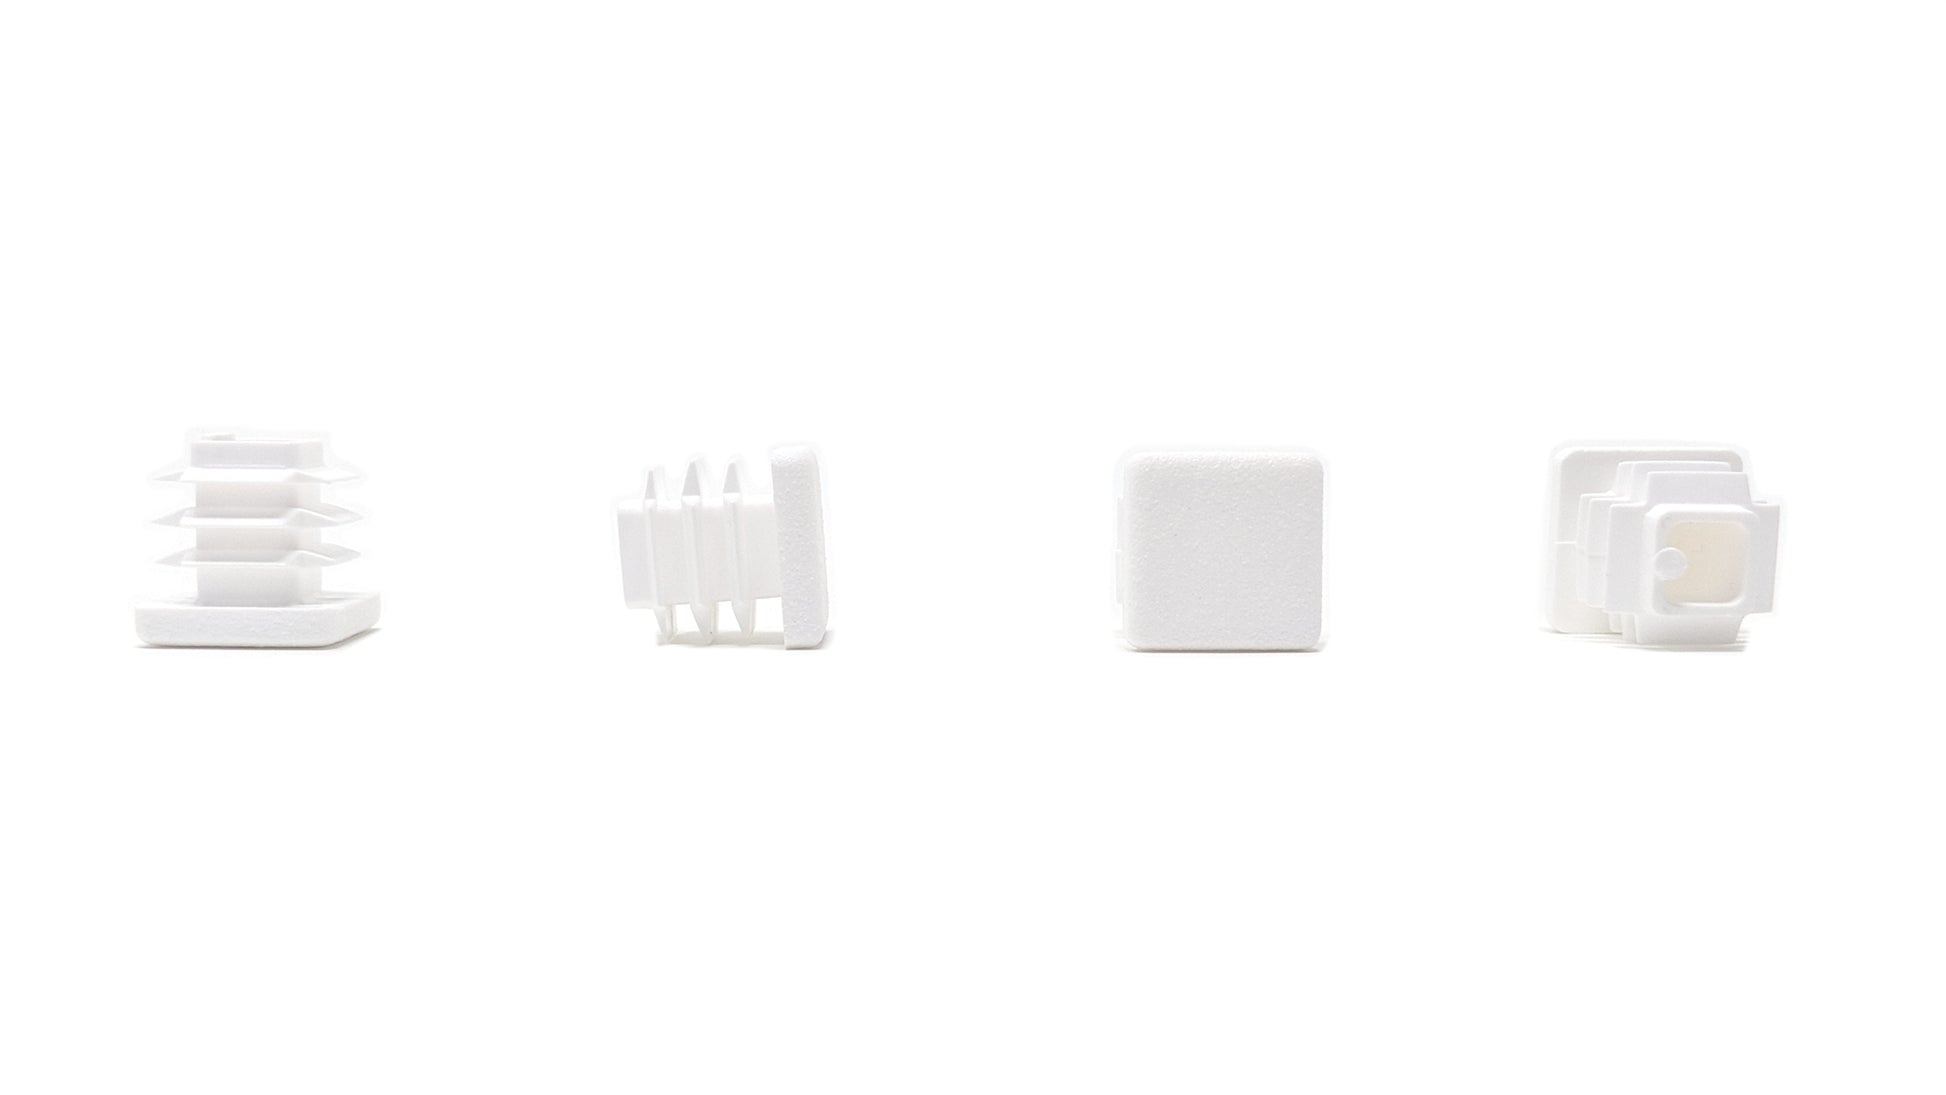 Square Tube Inserts 15mm x 15mm White | Made in Germany | Keay Vital Parts - Keay Vital Parts